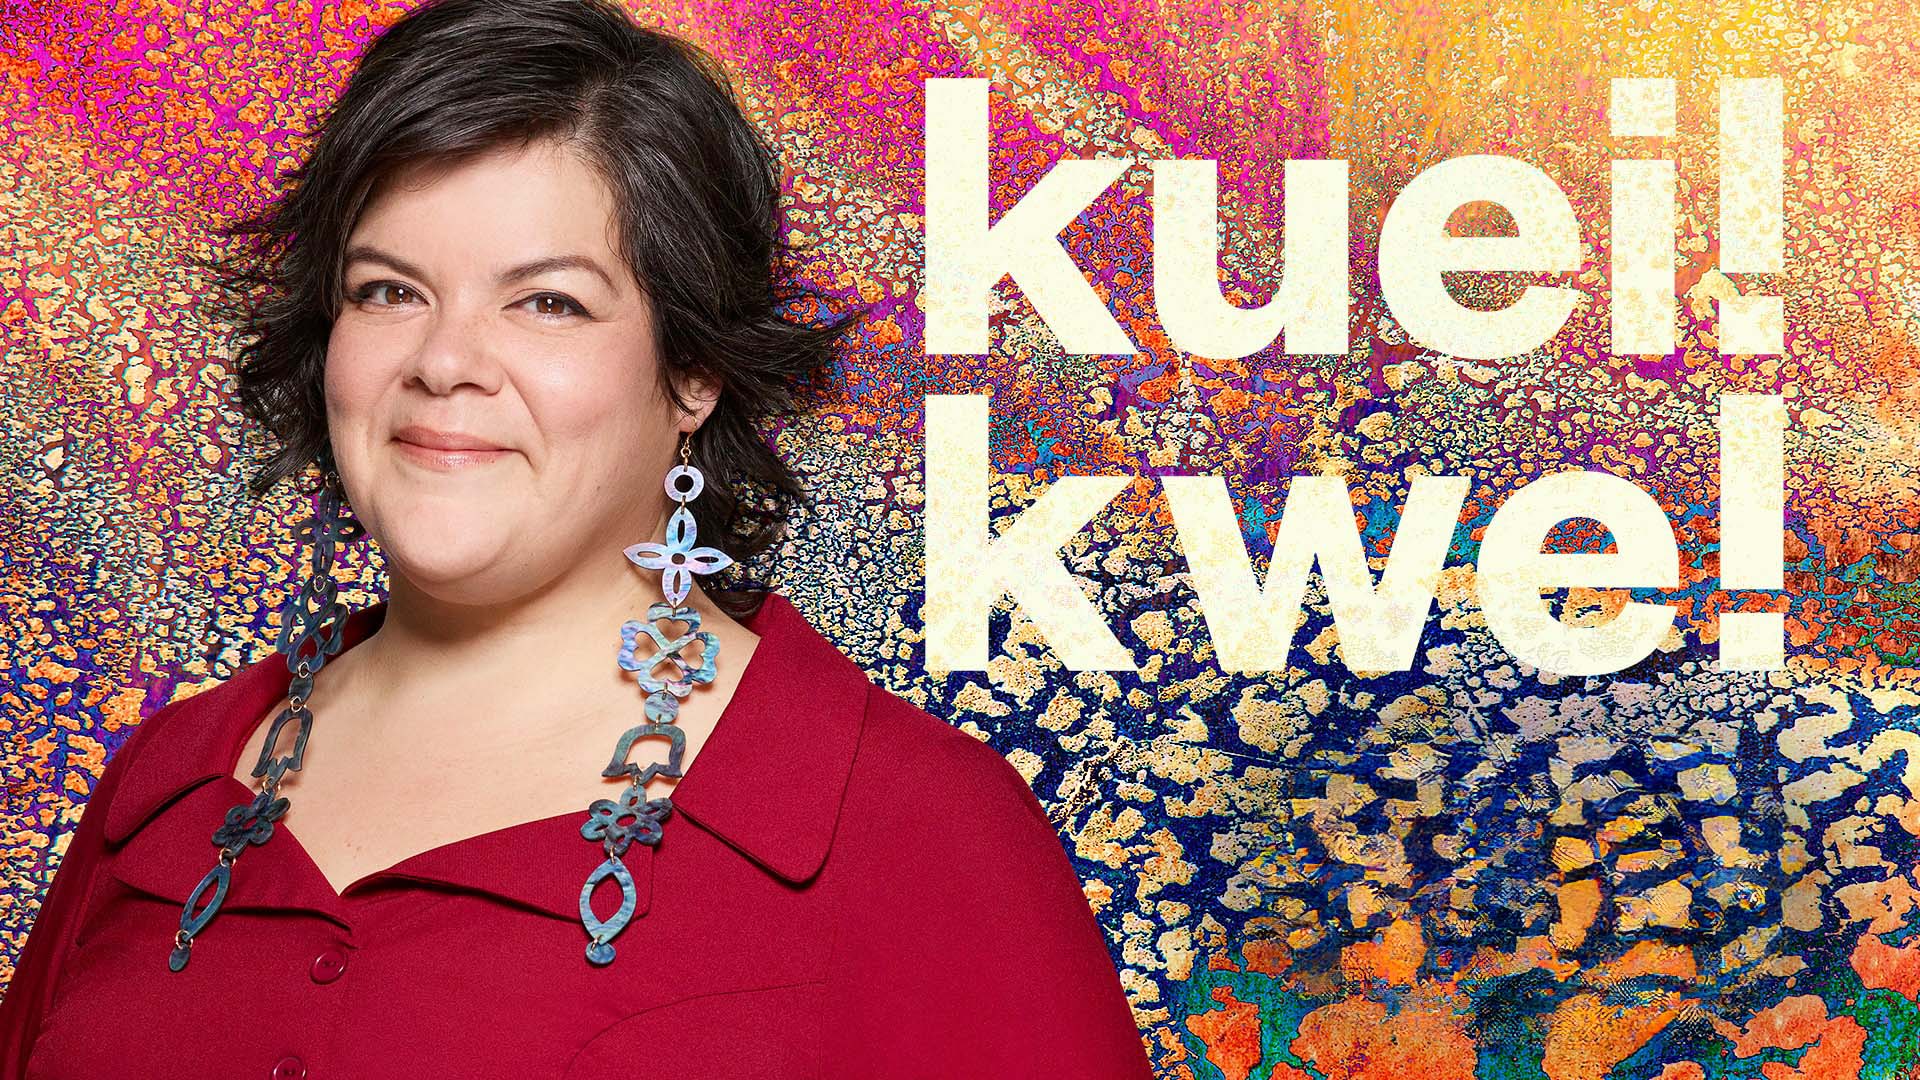 An image shows the host of a radio show on the left with Kuei! Kwe! written on the right over a colorful background with patterns.